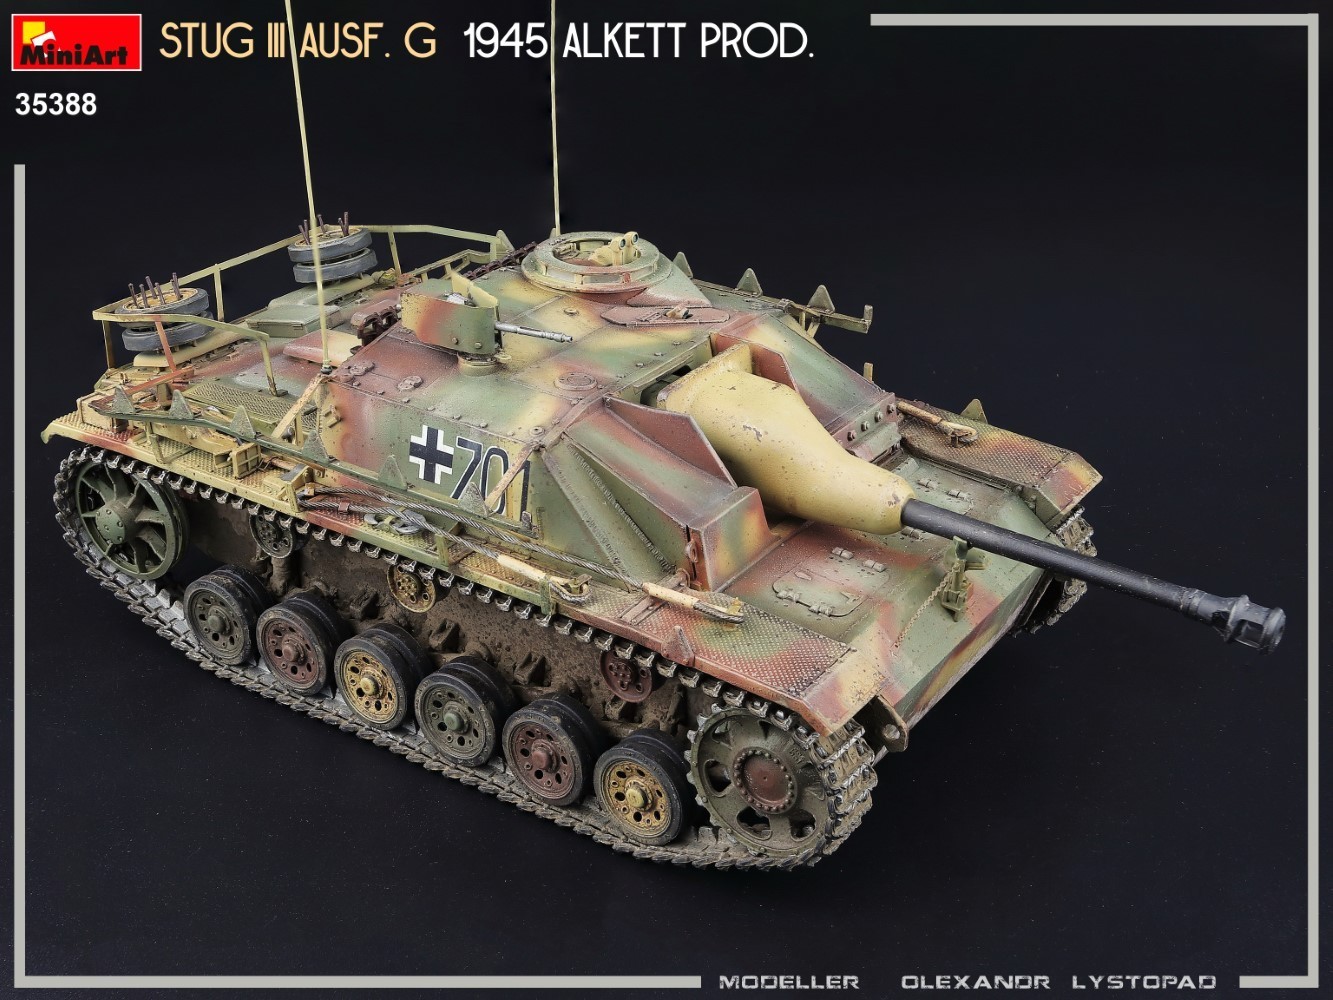 MiniArt to Release Highly Detailed 1/35 StuG III Ausf. G 1945 Alkett Prod. Model Kit Painting and Marking-9